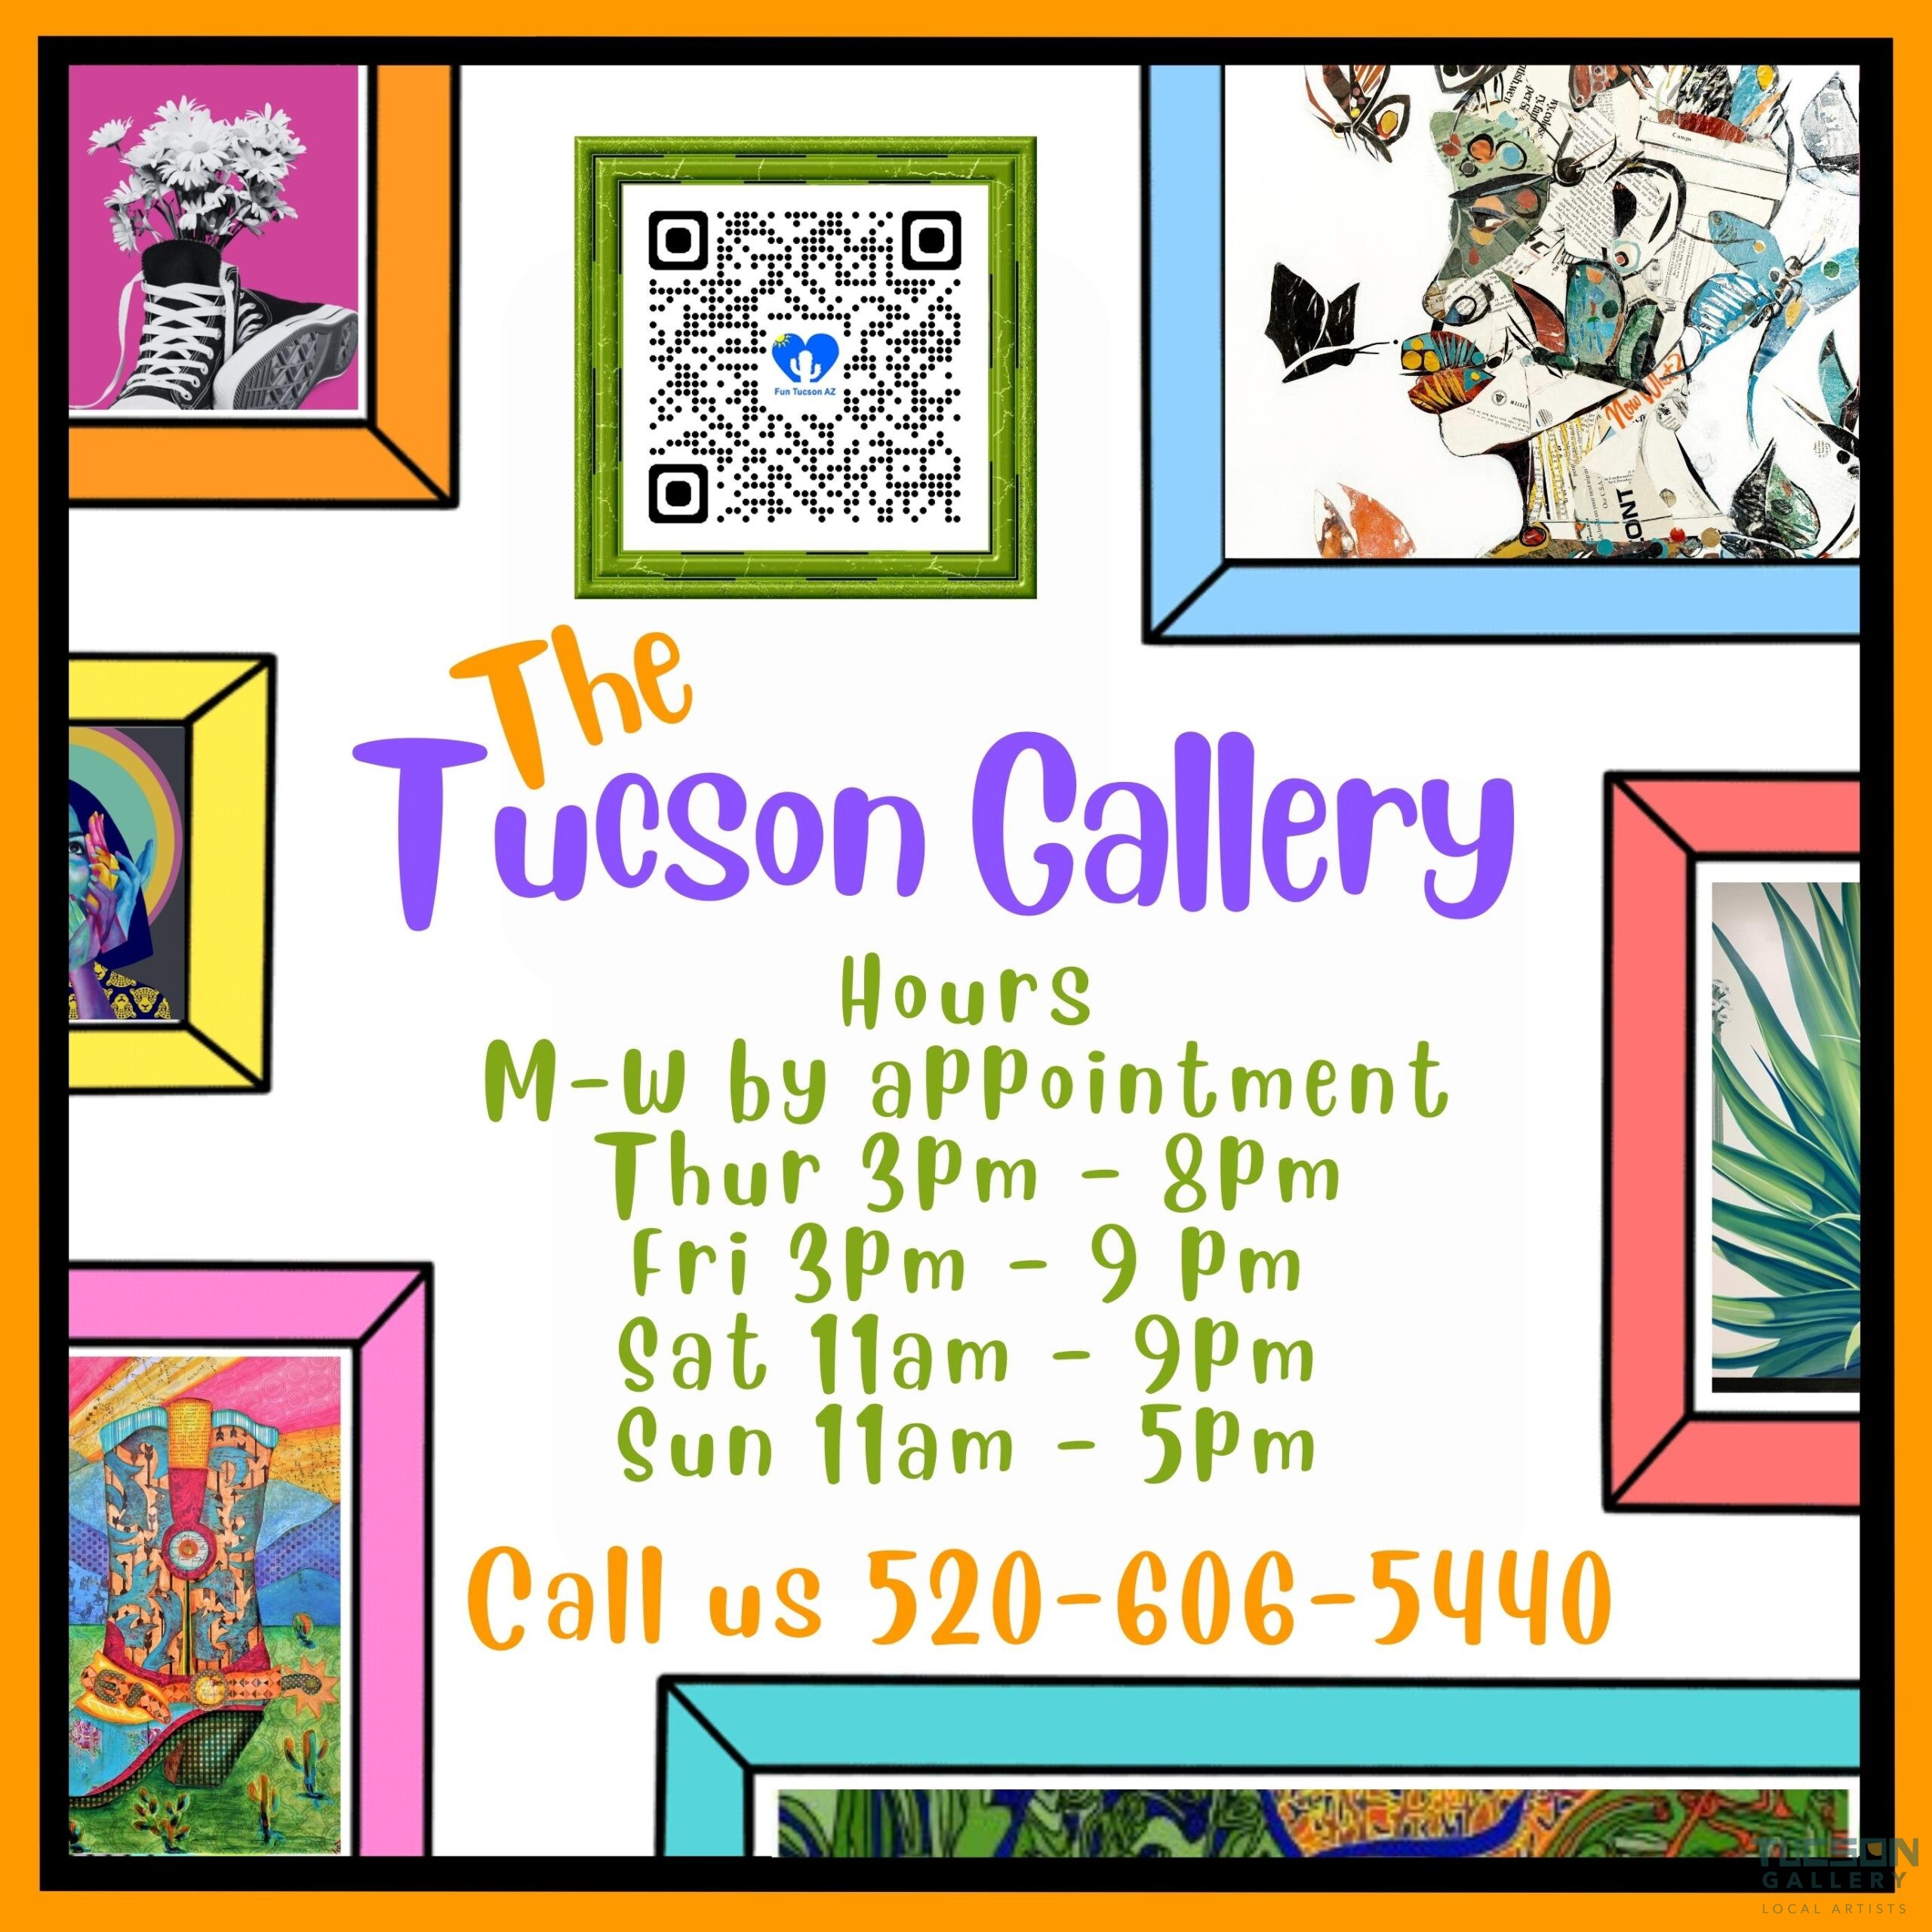 Tucson Gallery art hours local artists originals gifts souvenirs